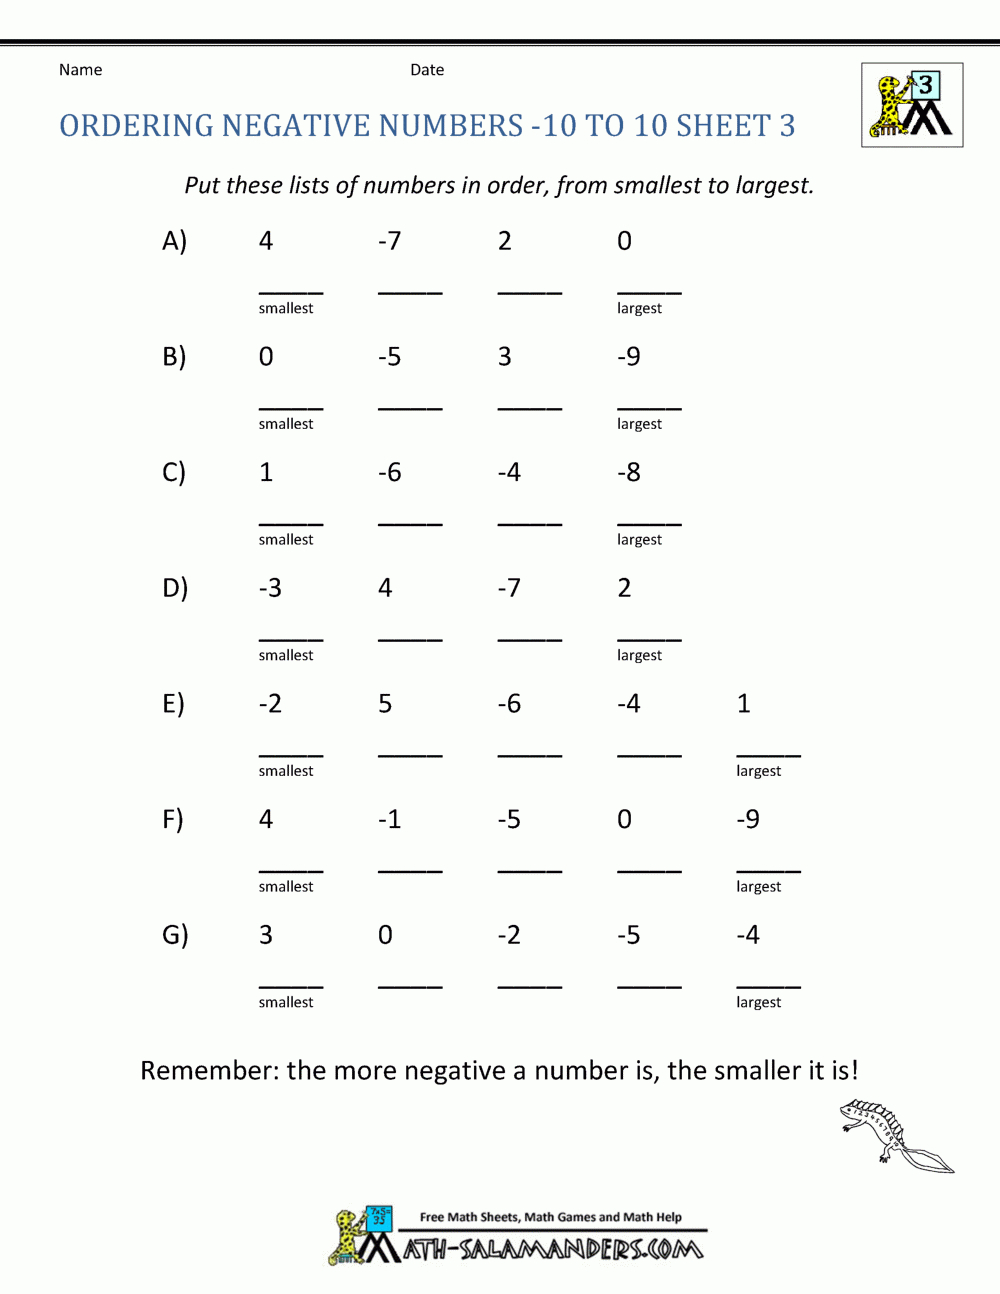 positive-and-negative-numbers-worksheet-db-excel